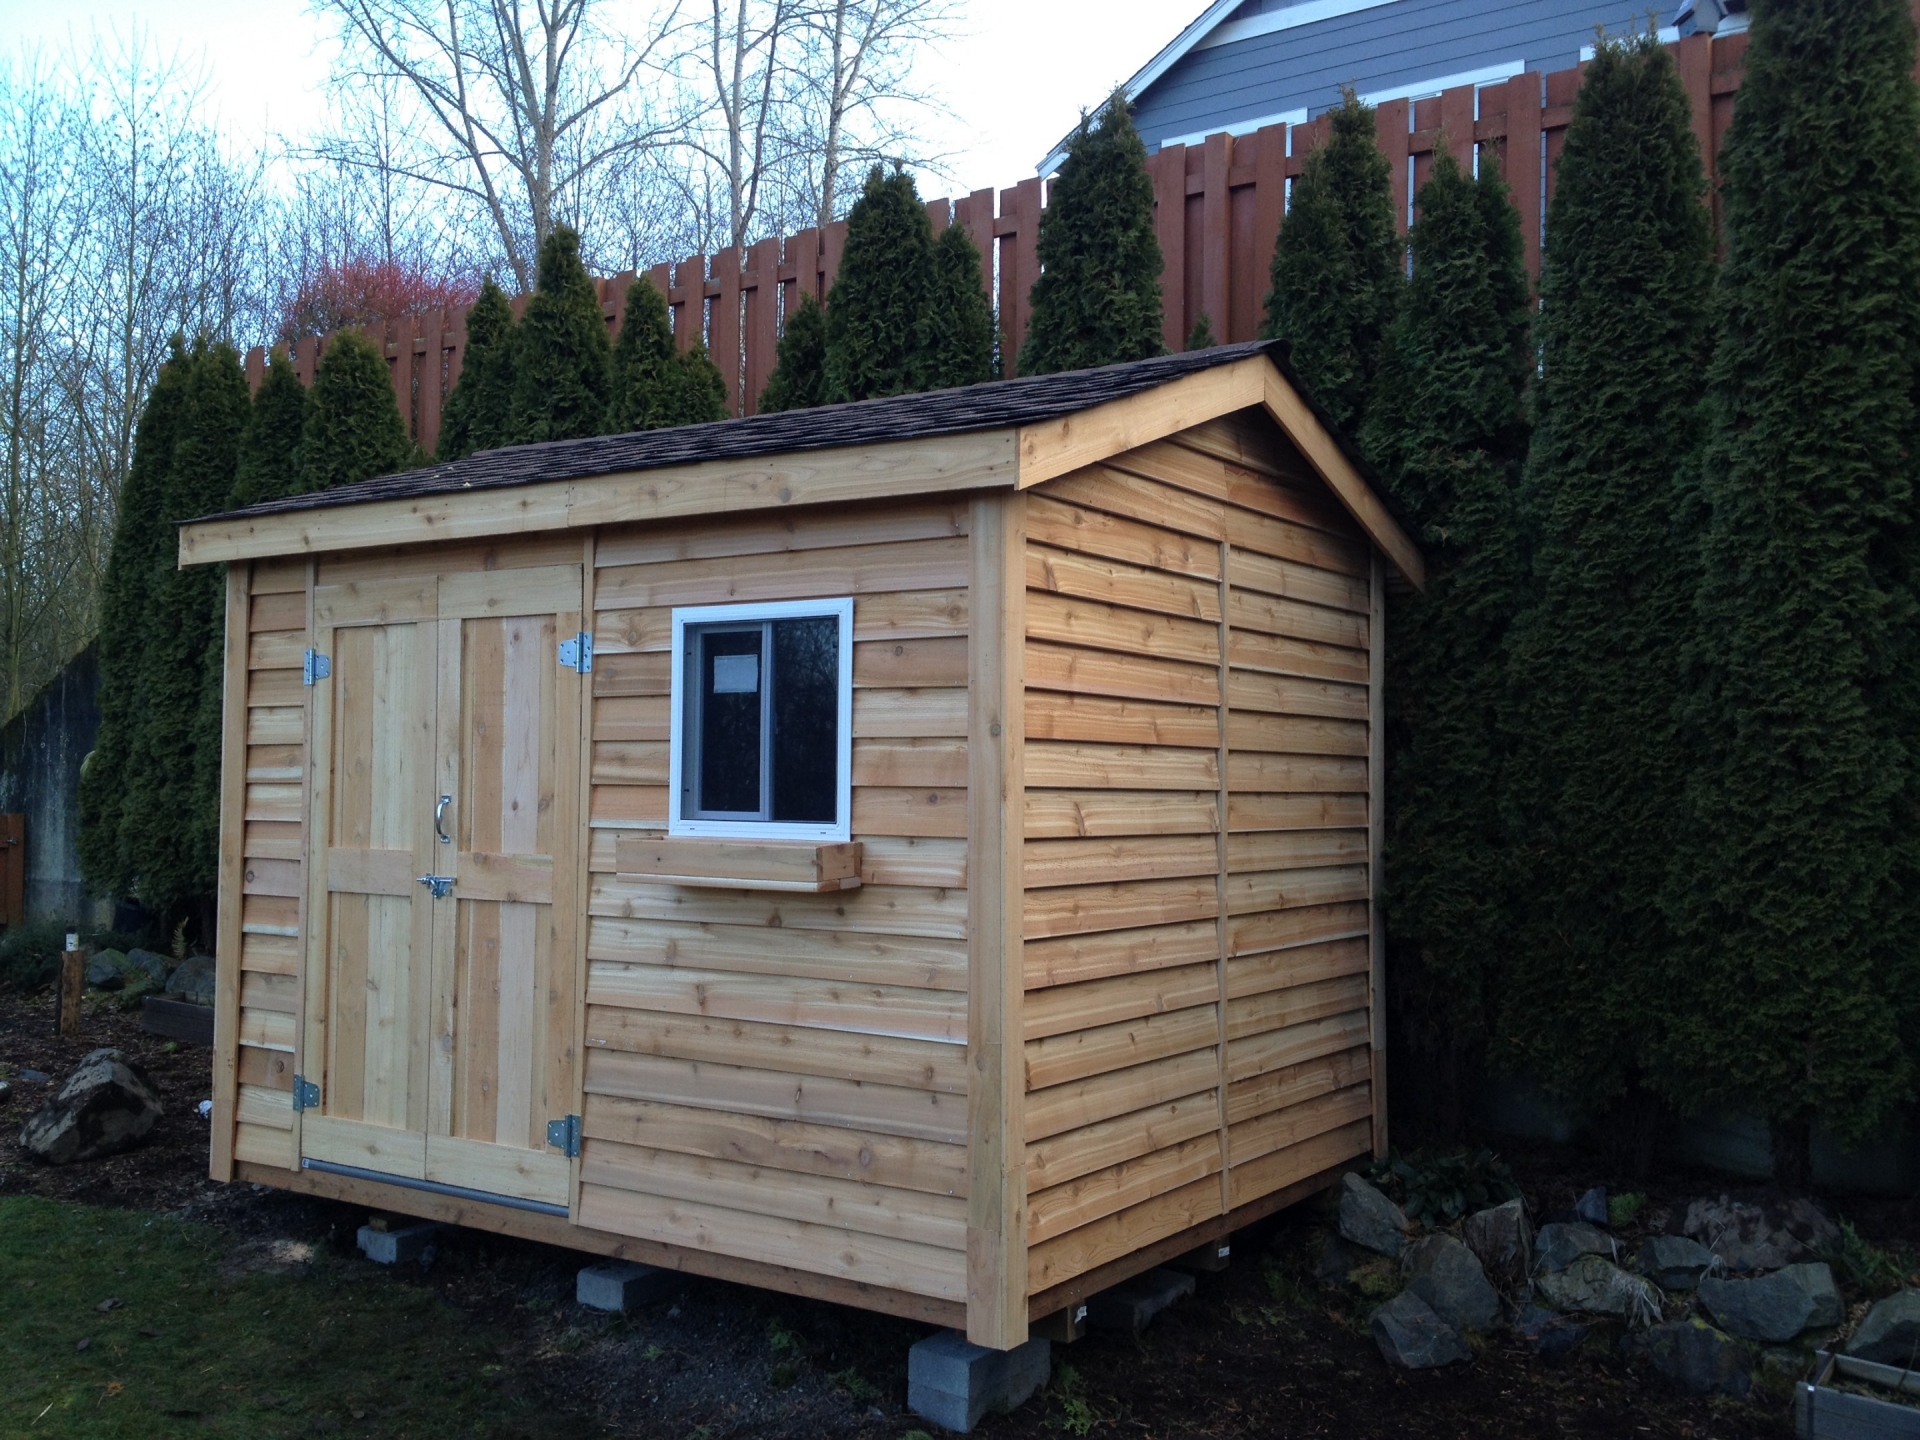 8X10 Standard Shed